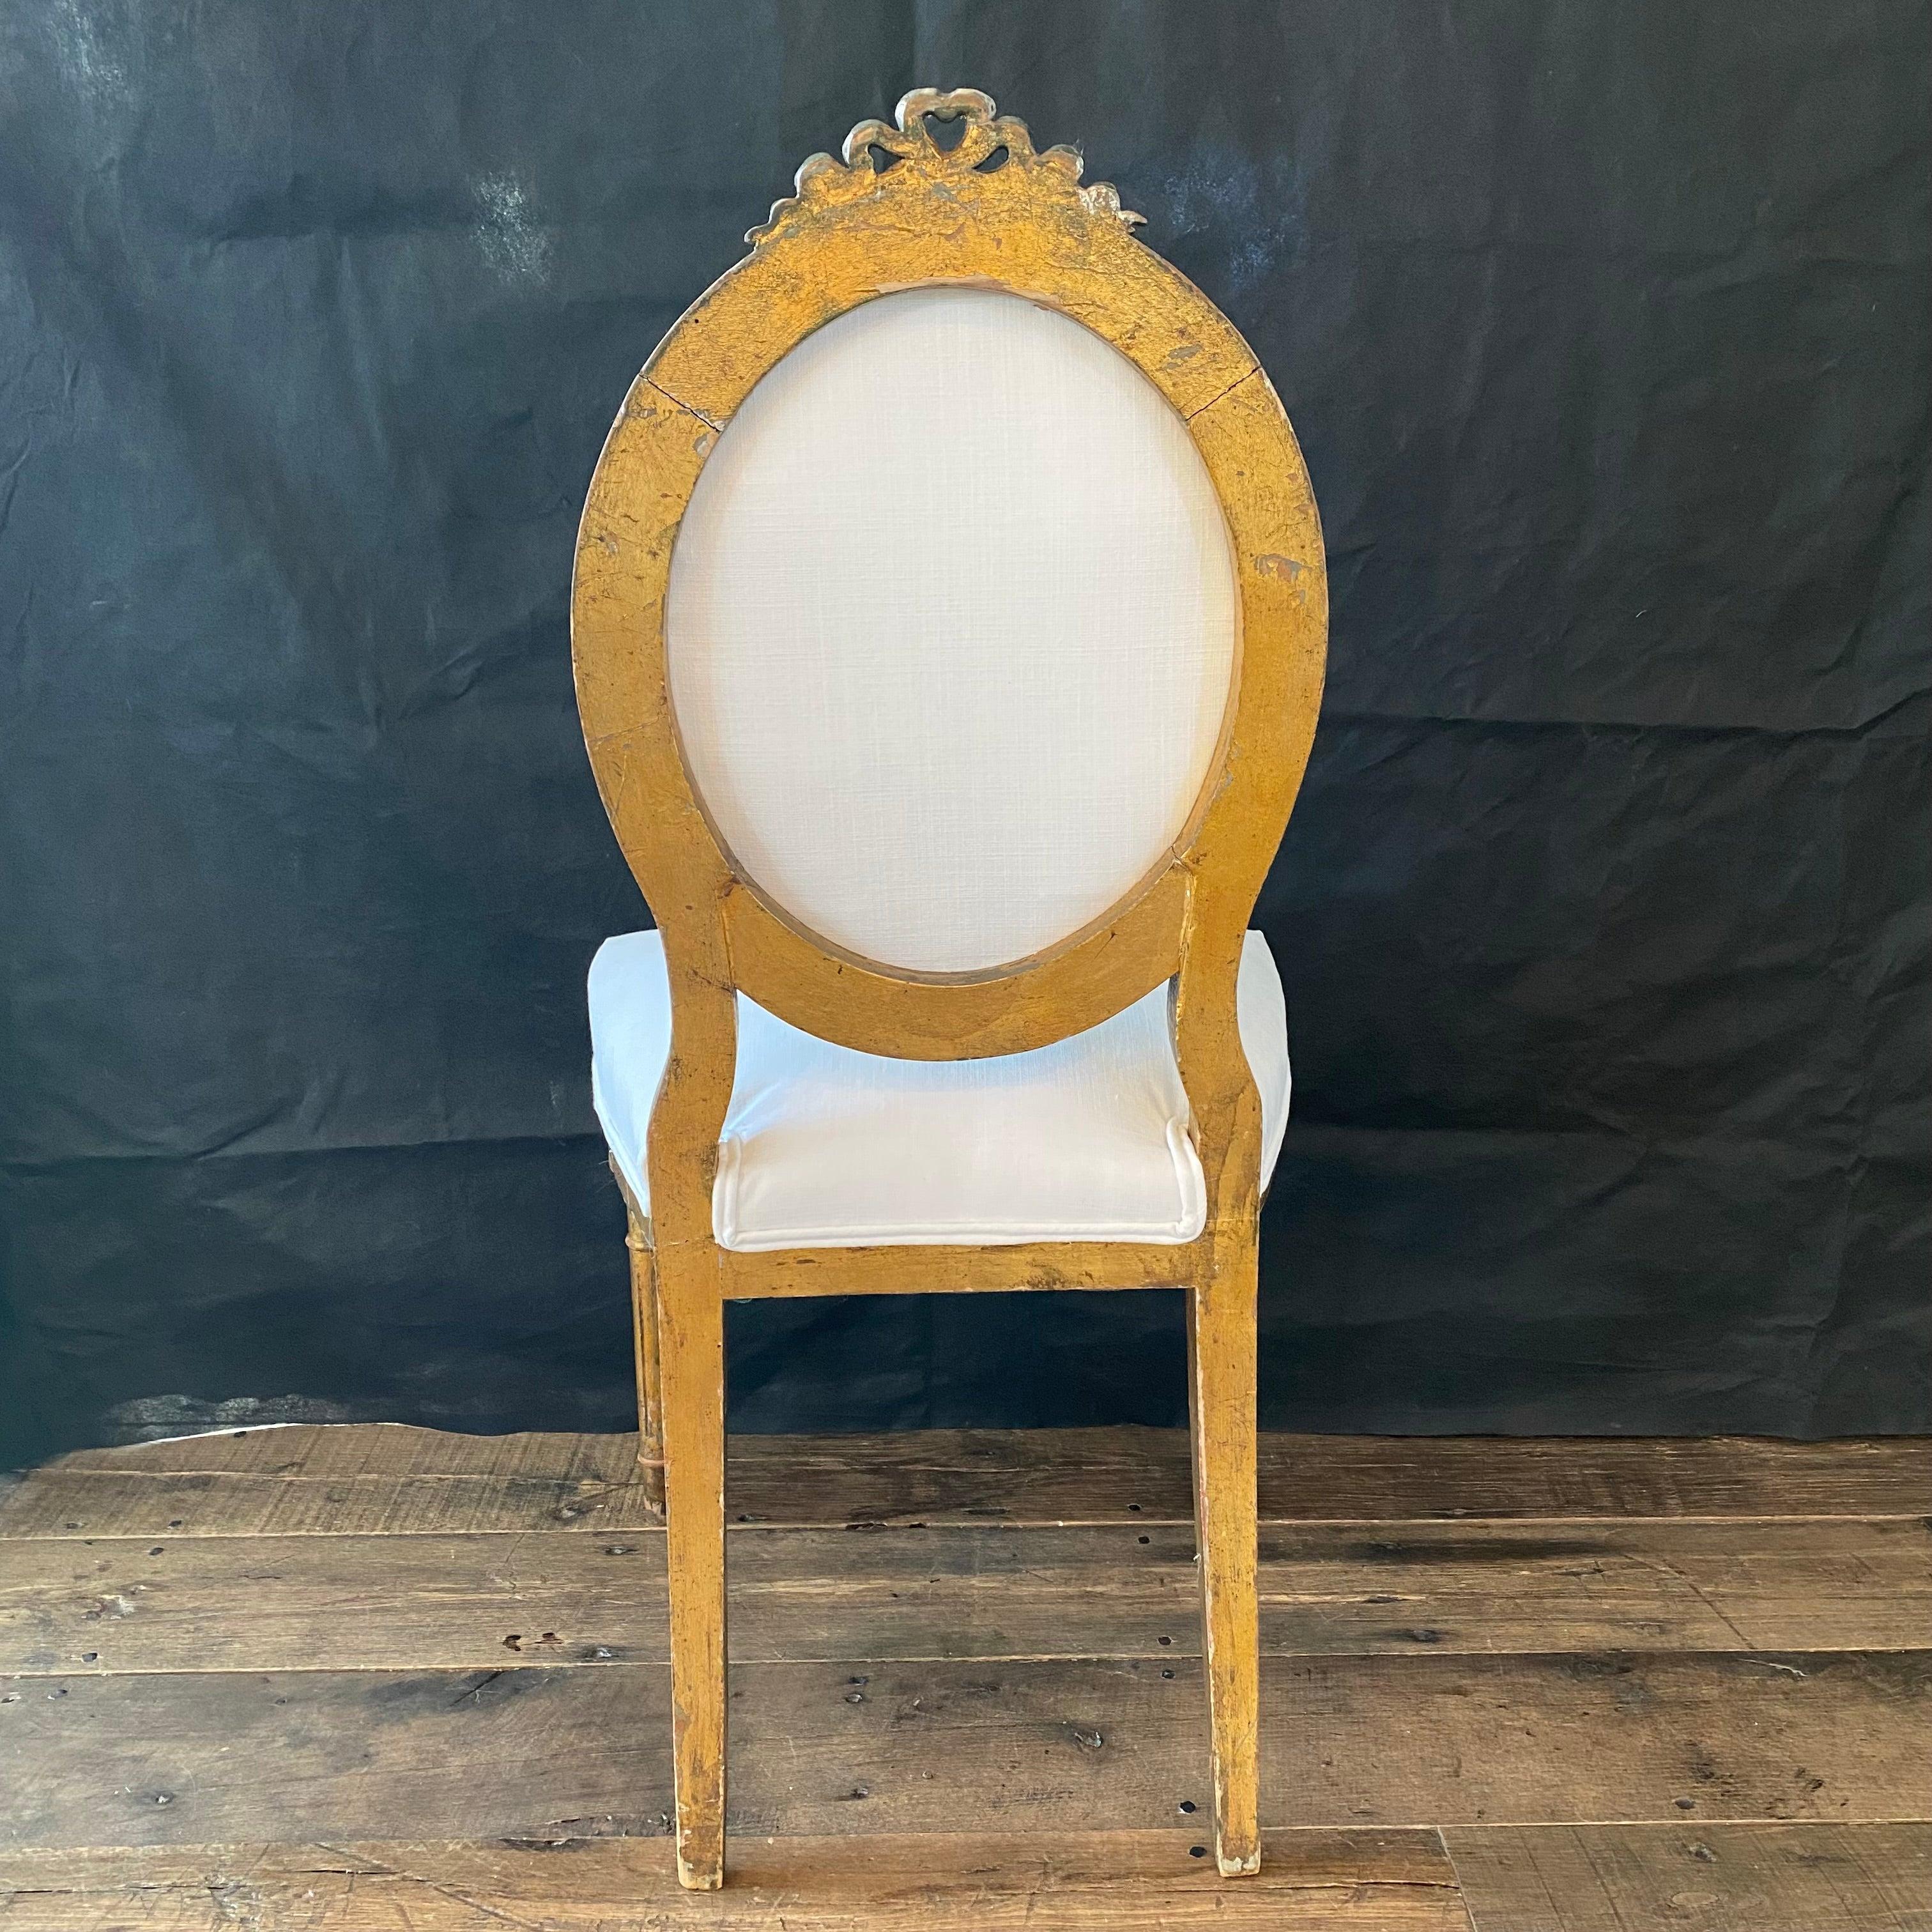 Stunning and romantic set of four antique French Neoclassical Louis XV chairs in original gold gilt paint, newly reupholstered in high quality French ivory linen blend. #5798